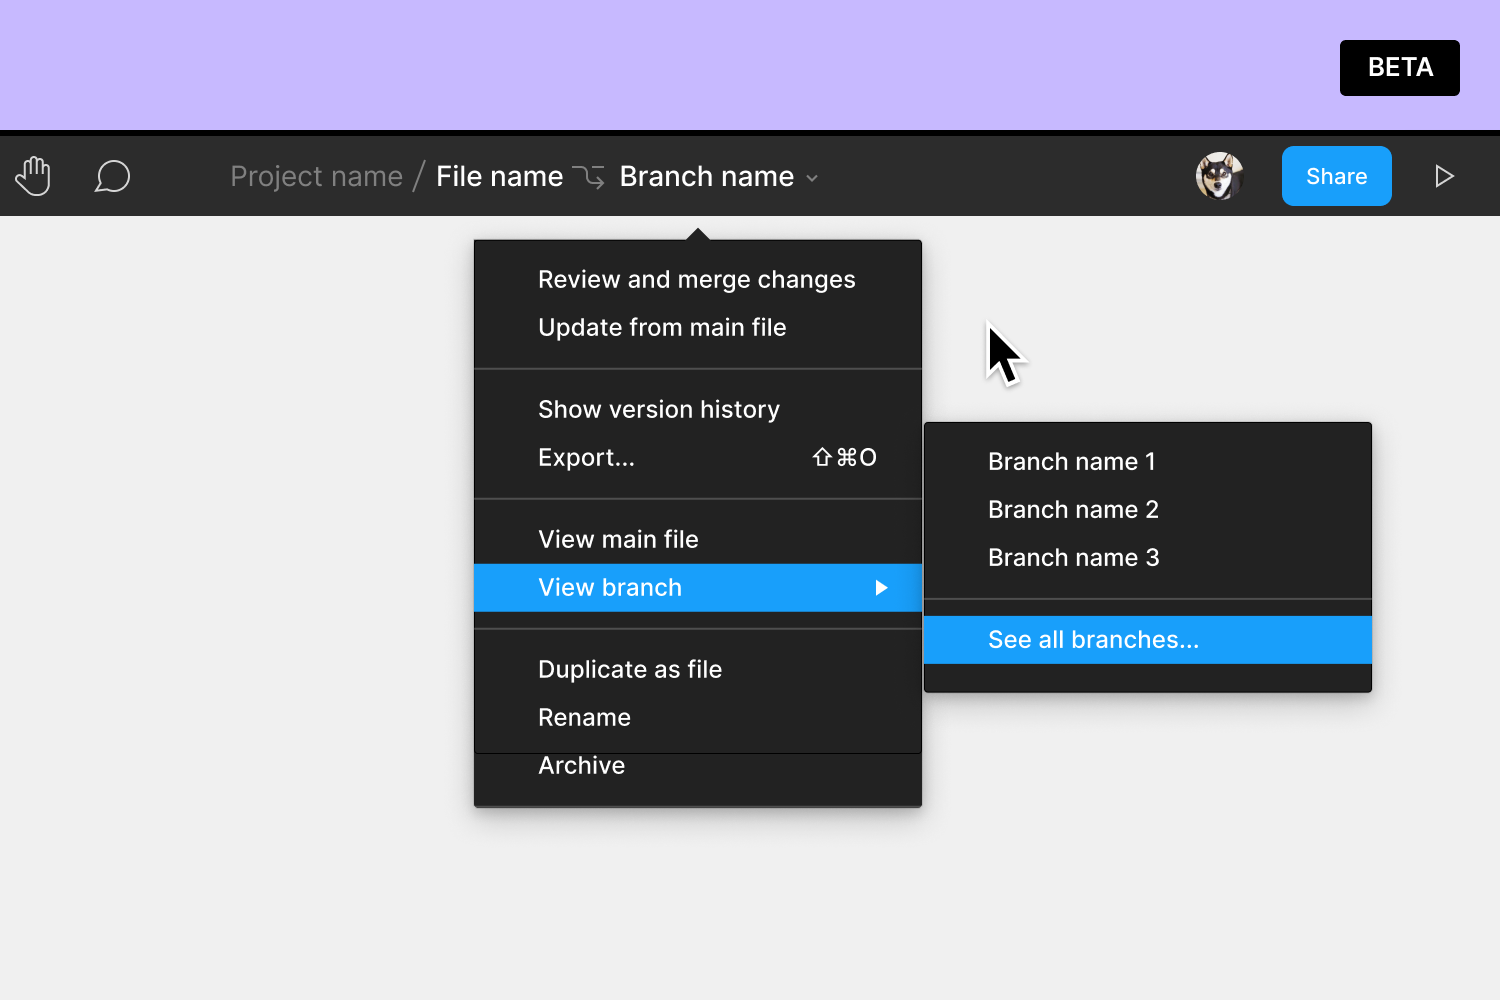 See all branches in Figma